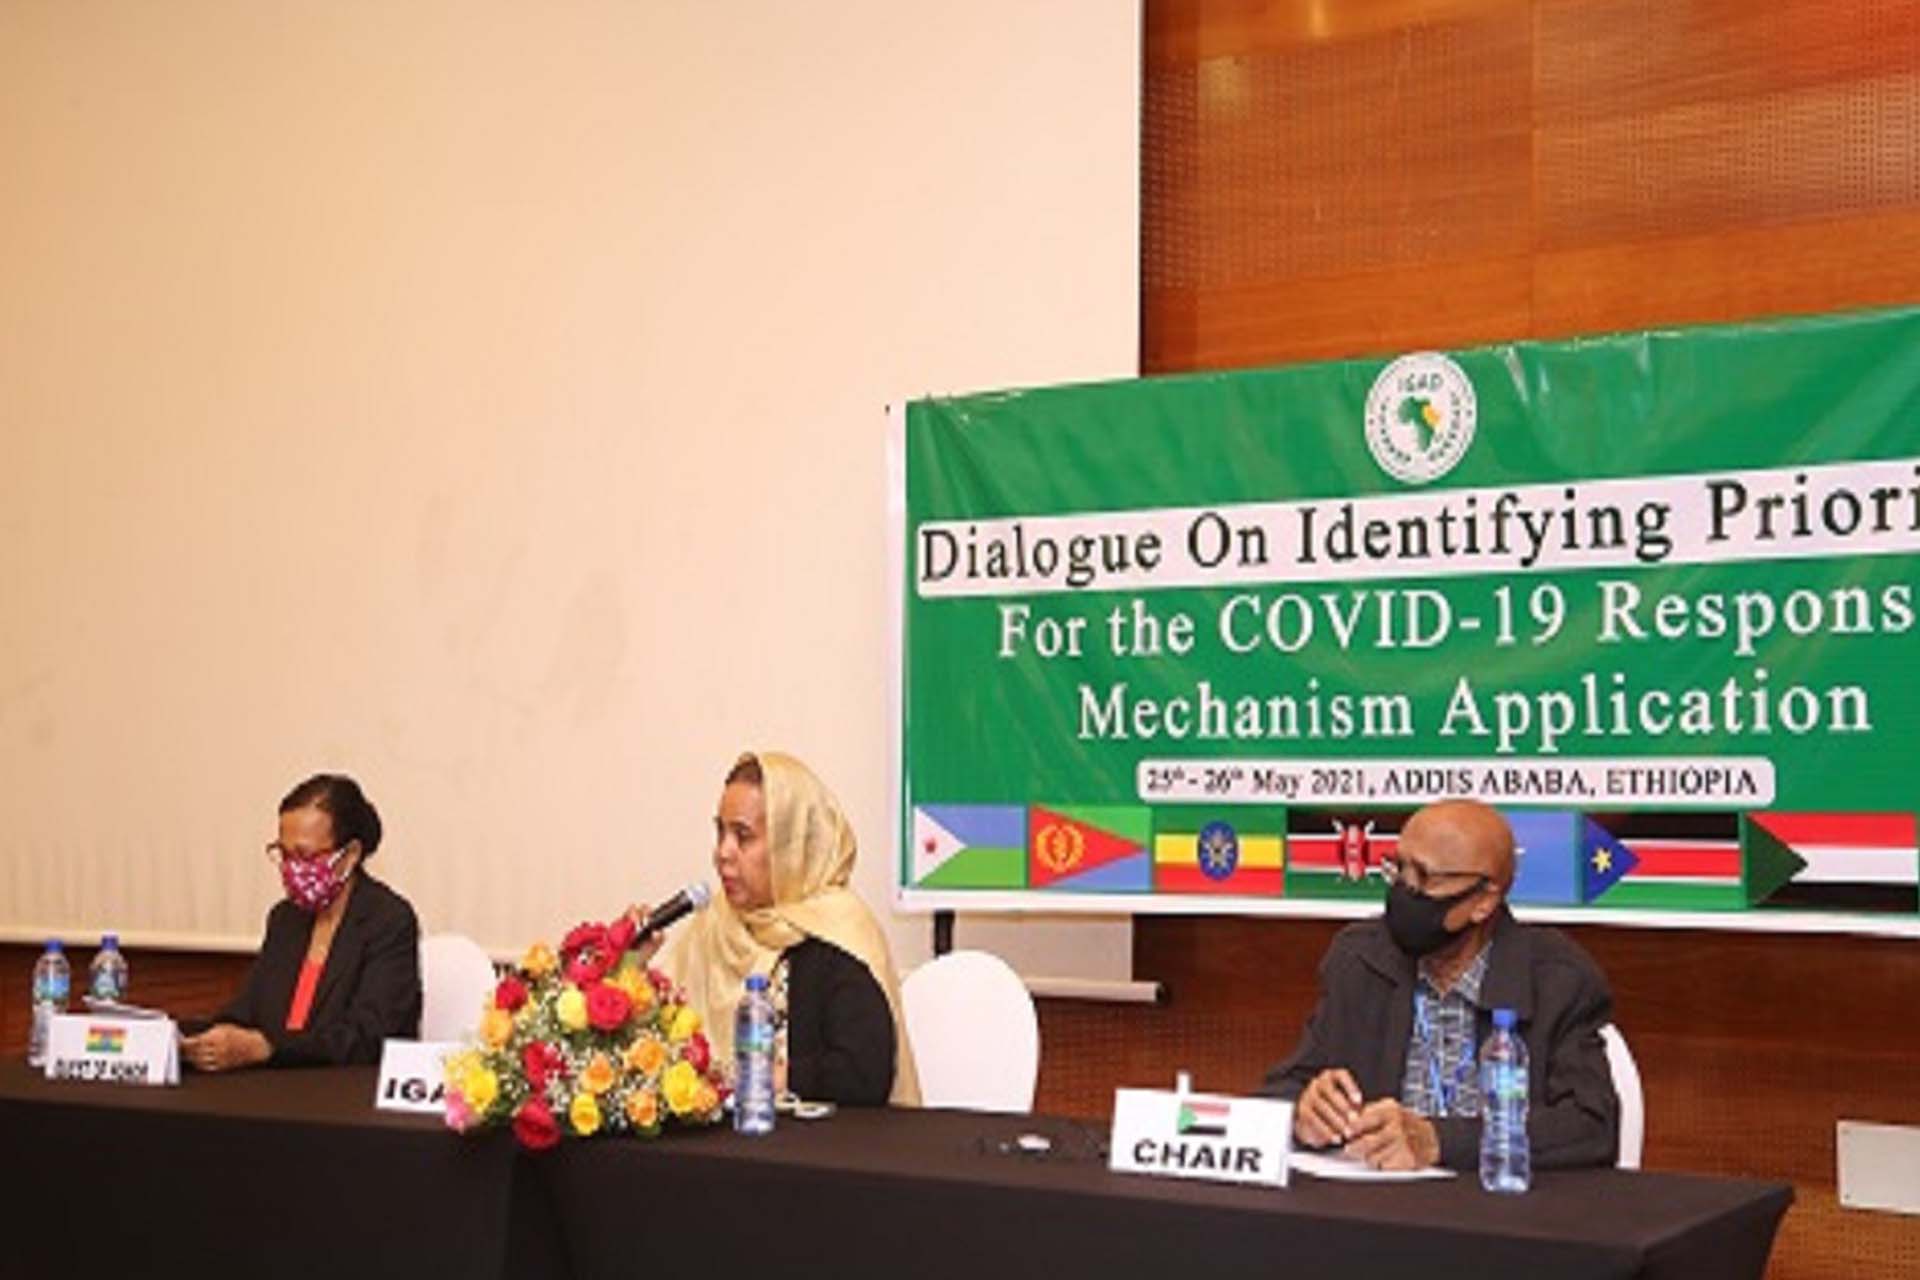 IGAD to Collaborate Further with the Global Fund on COVID-19 Response and TB in Refugee Settings